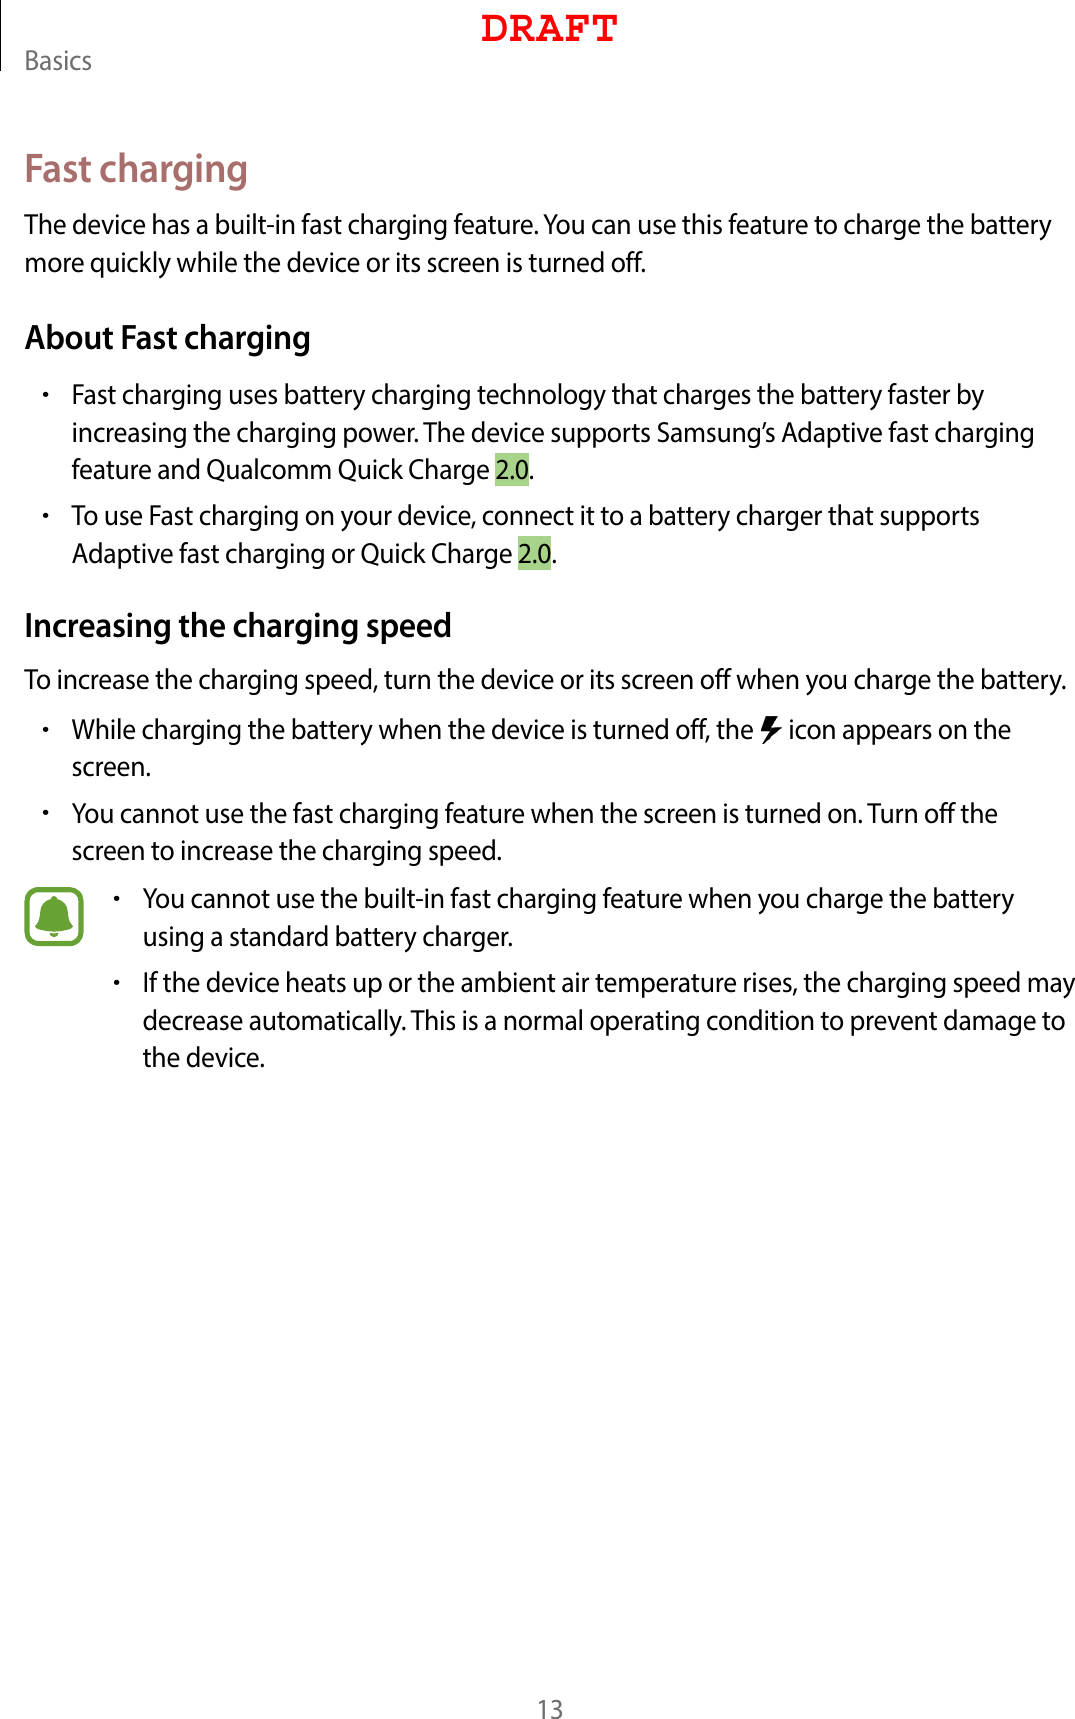 Basics13Fast chargingThe device has a built-in fast charging feature. You can use this feature to charge the battery more quickly while the device or its screen is turned off.About Fast charging•Fast charging uses battery charging technology that charges the battery faster by increasing the charging power. The device supports Samsung’s Adaptive fast charging feature and Qualcomm Quick Charge 2.0.•To use Fast charging on your device, connect it to a battery charger that supports Adaptive fast charging or Quick Charge 2.0.Increasing the charging speedTo increase the charging speed, turn the device or its screen off when you charge the battery.•While charging the battery when the device is turned off, the   icon appears on the screen.•You cannot use the fast charging feature when the screen is turned on. Turn off the screen to increase the charging speed.•You cannot use the built-in fast charging feature when you charge the battery using a standard battery charger.•If the device heats up or the ambient air temperature rises, the charging speed may decrease automatically. This is a normal operating condition to prevent damage to the device.DRAFT